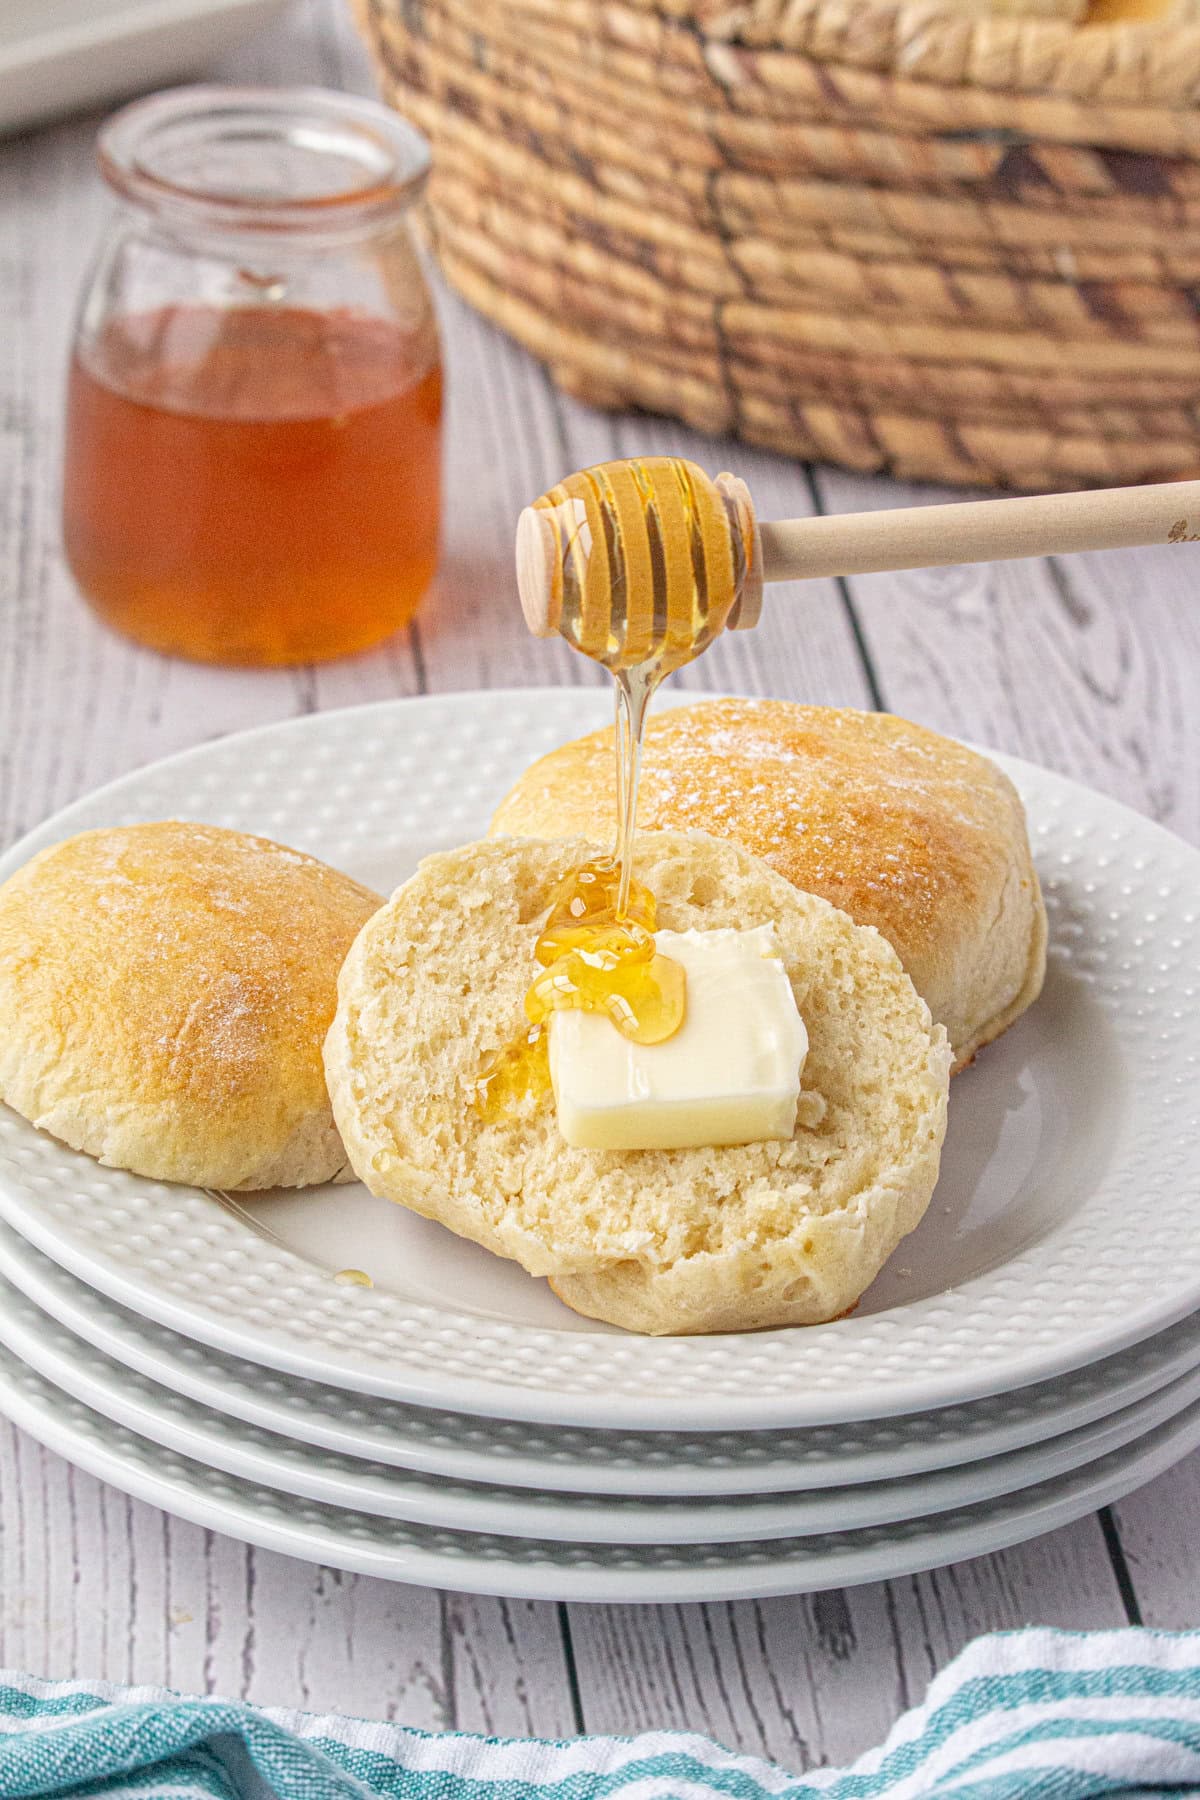 Hot dinner rolls on a plate with honey drizzled on them.